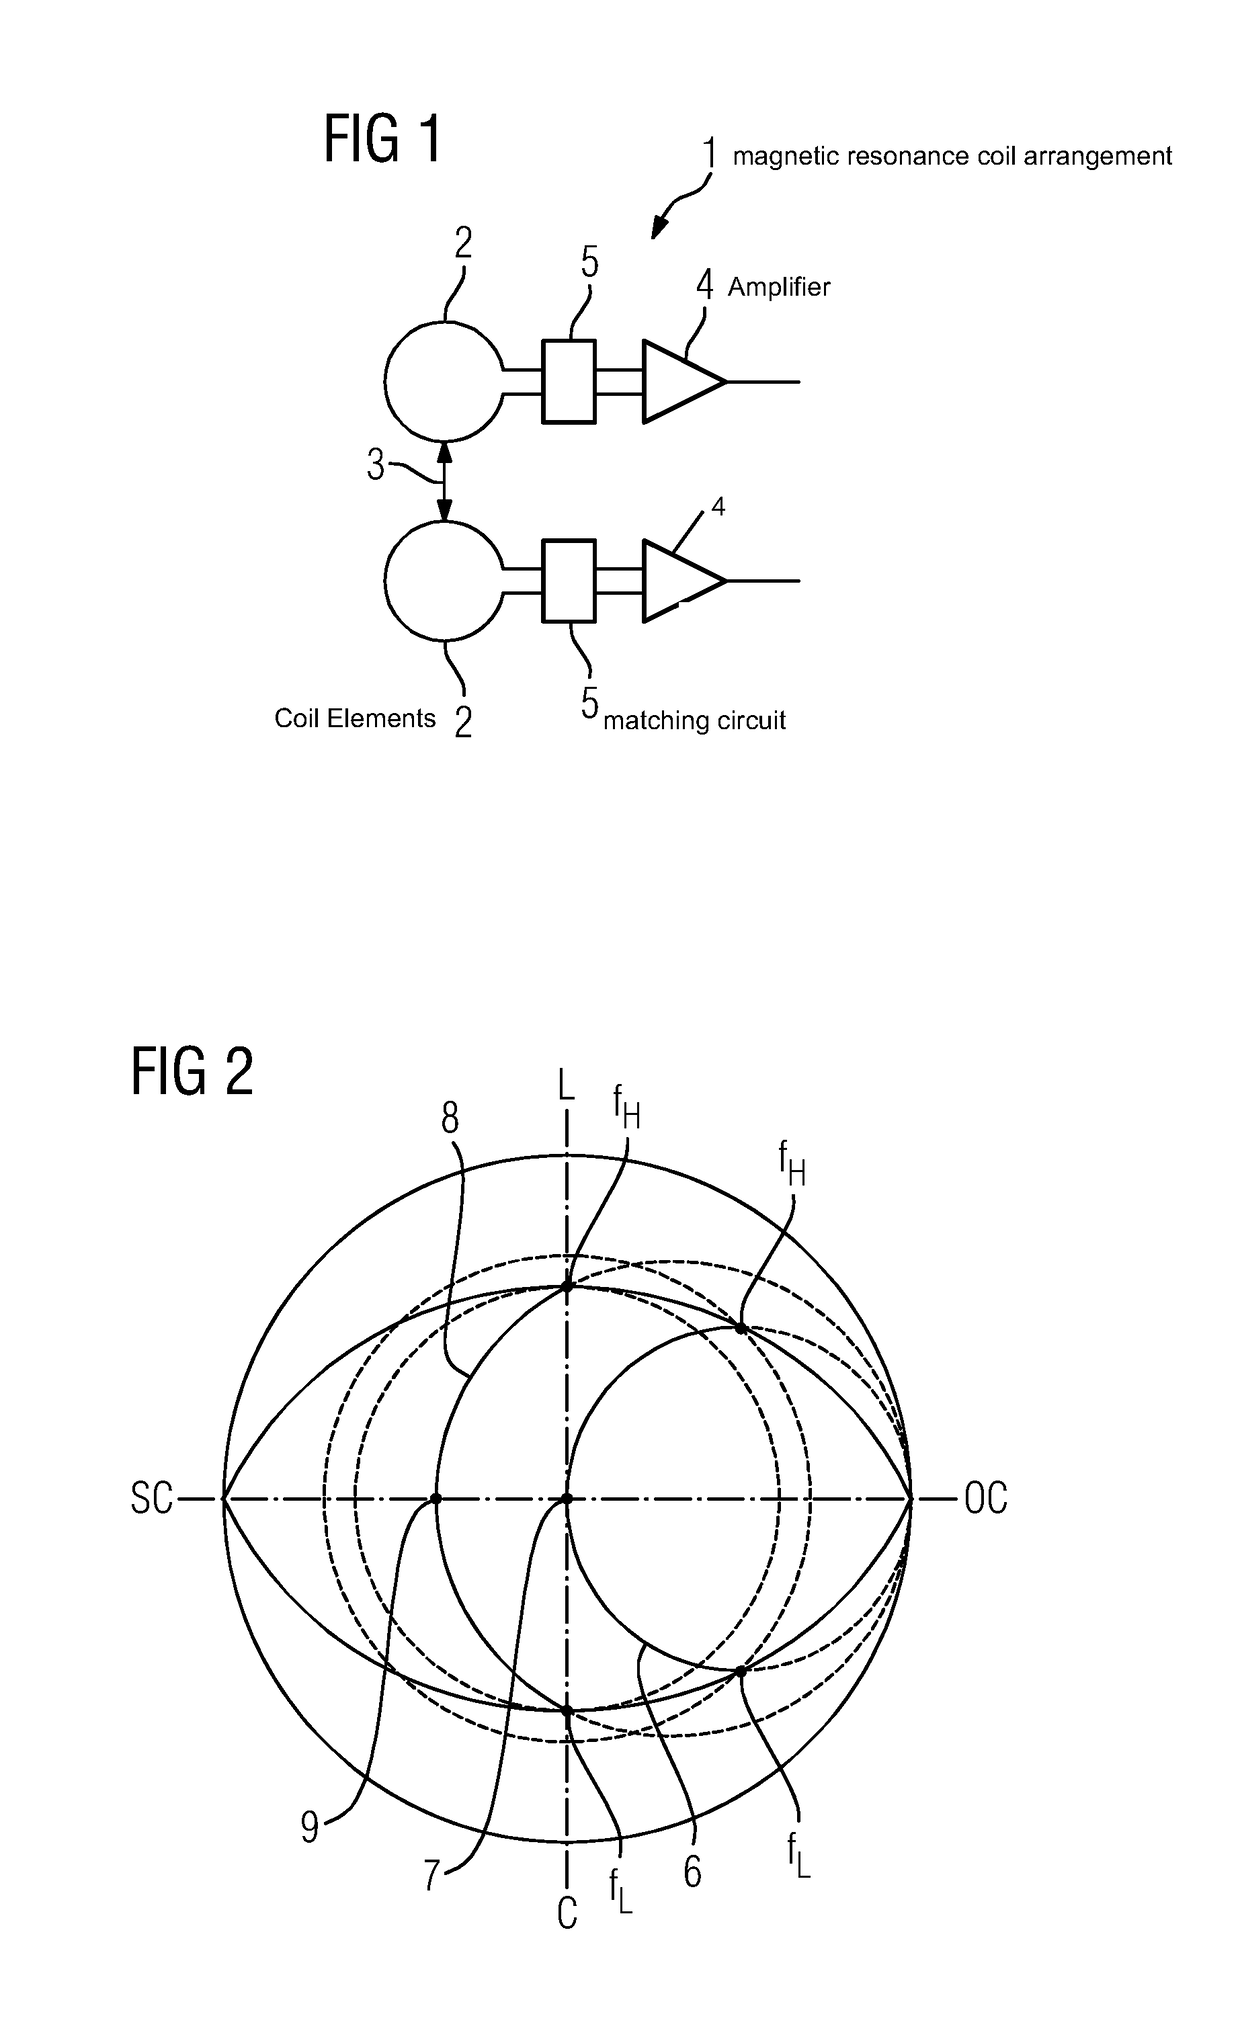 Reduction of coupling effects between coil elements of a magnetic resonance coil arrangement